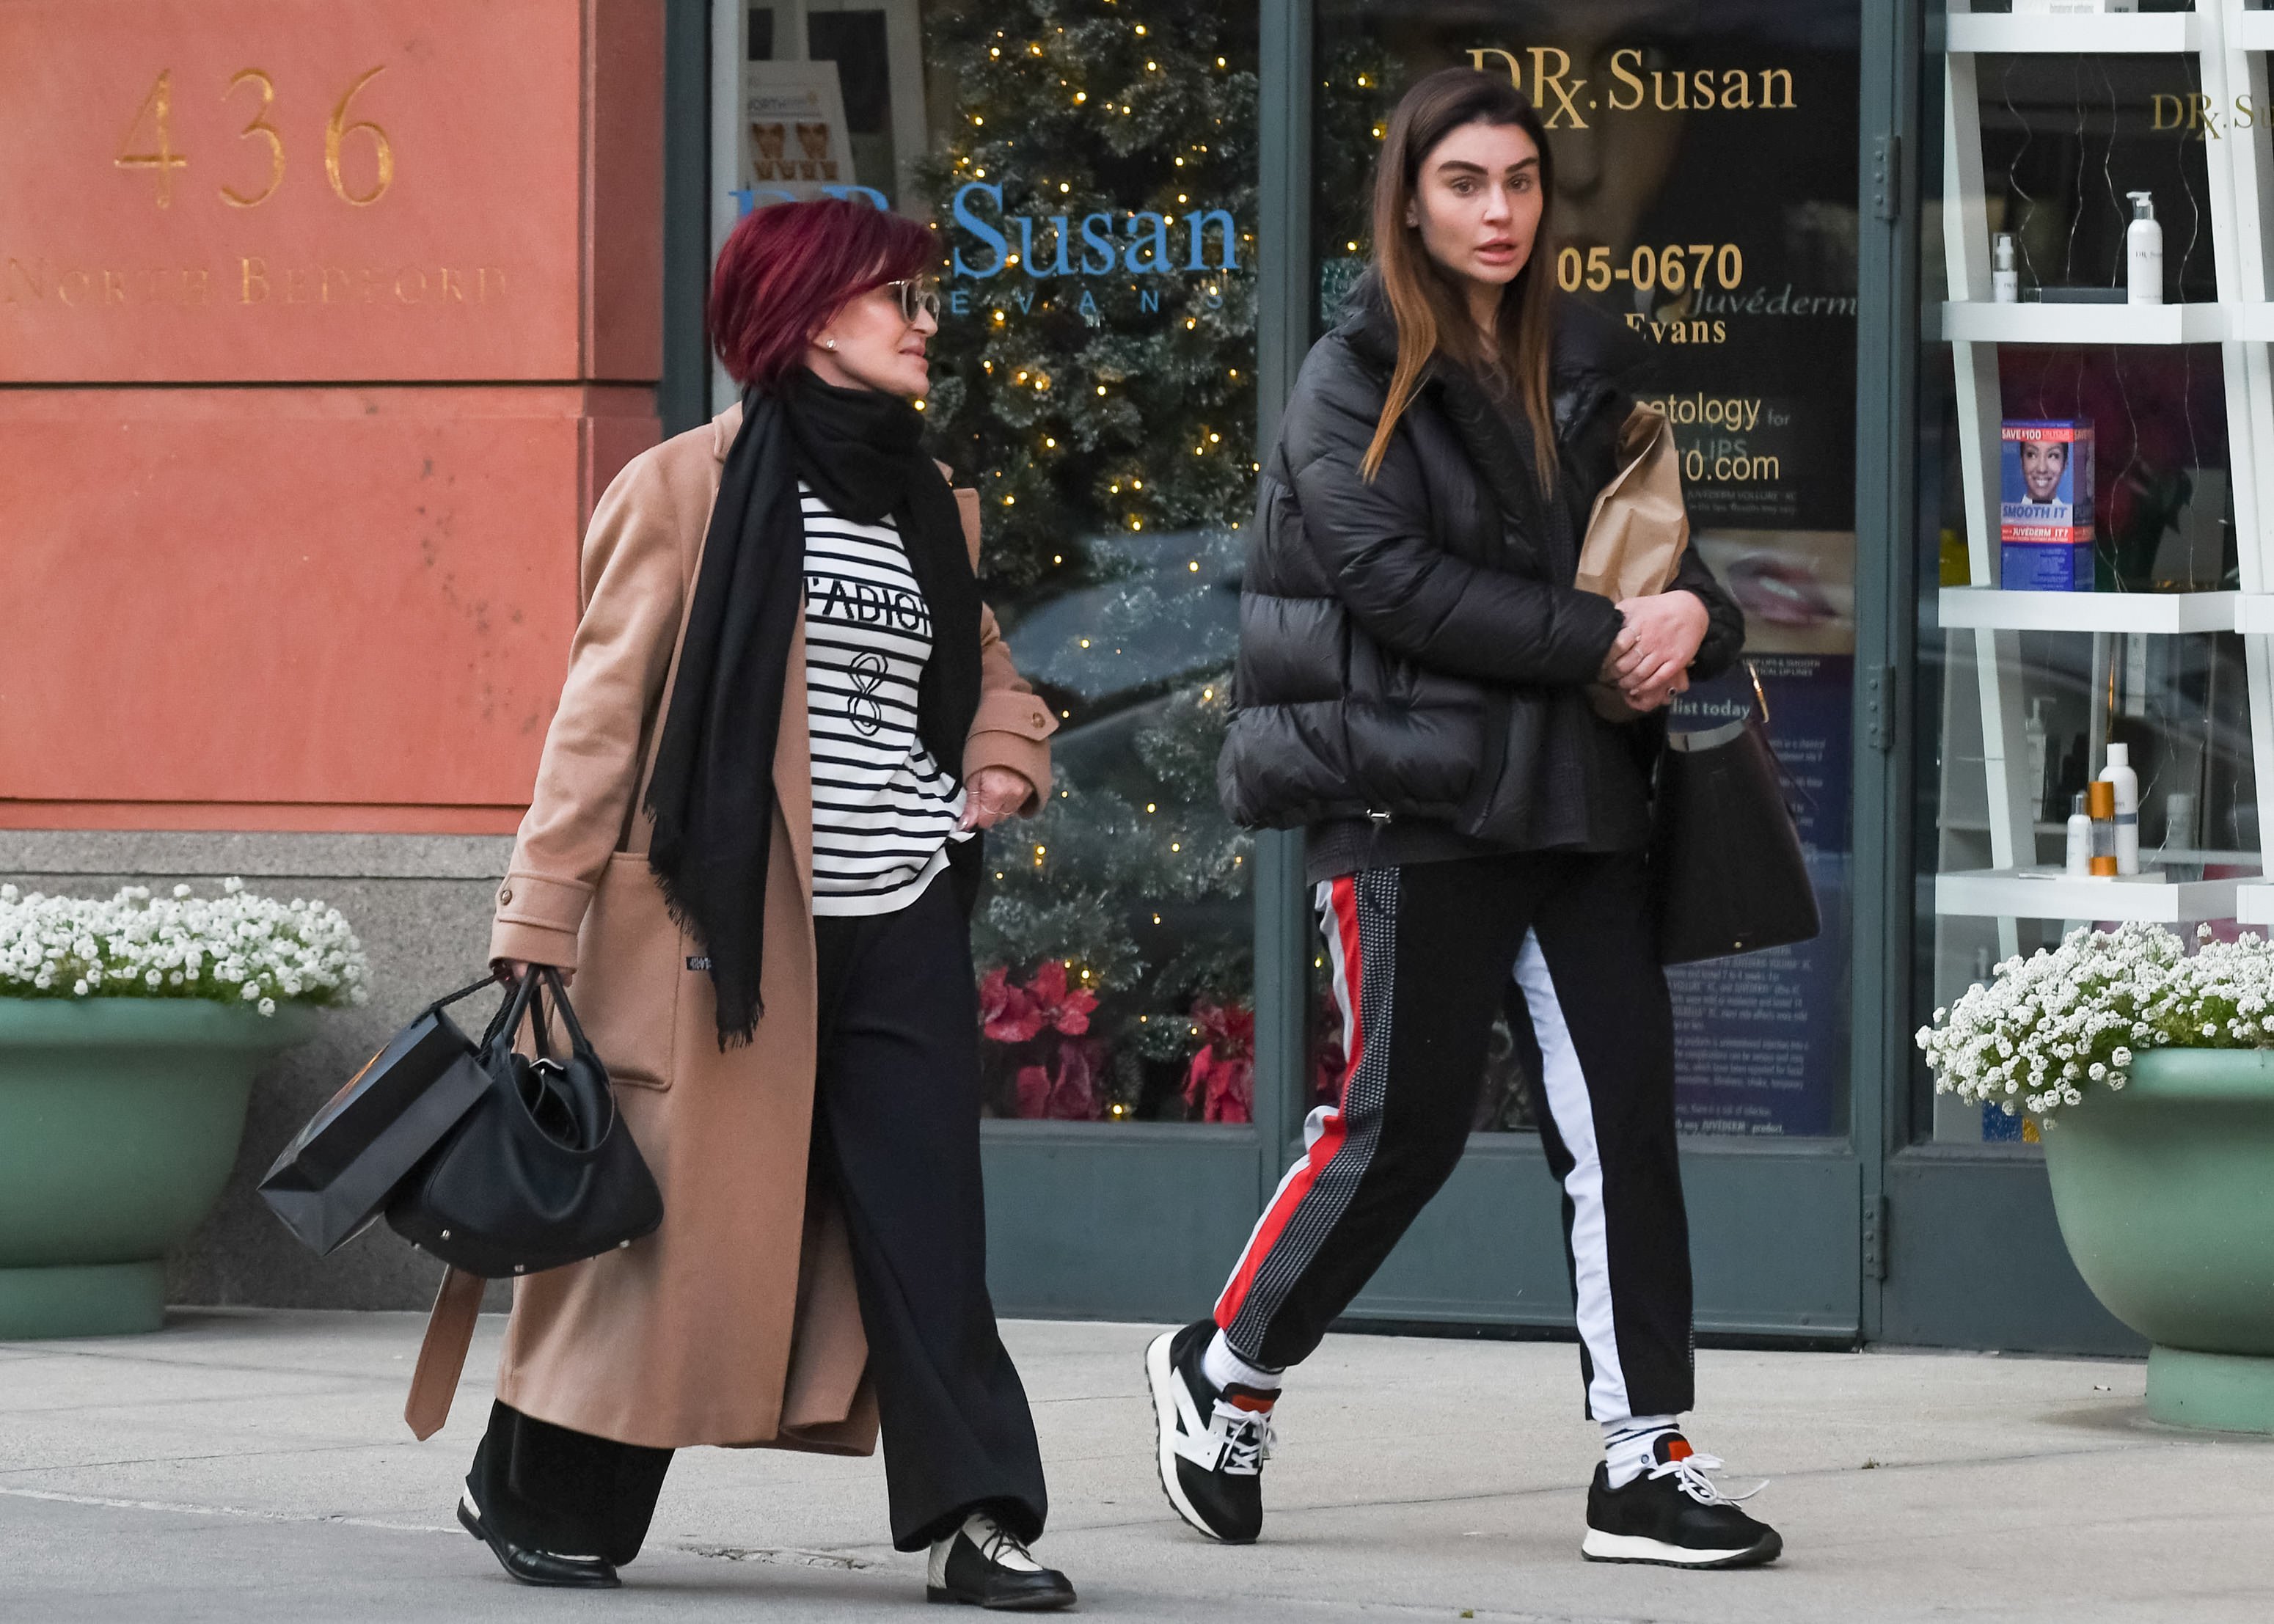 Sharon Osbourne and her daughter, Aimee Osbourne spotted on January 8, 2020 in Los Angeles, California. / Source: Getty Images